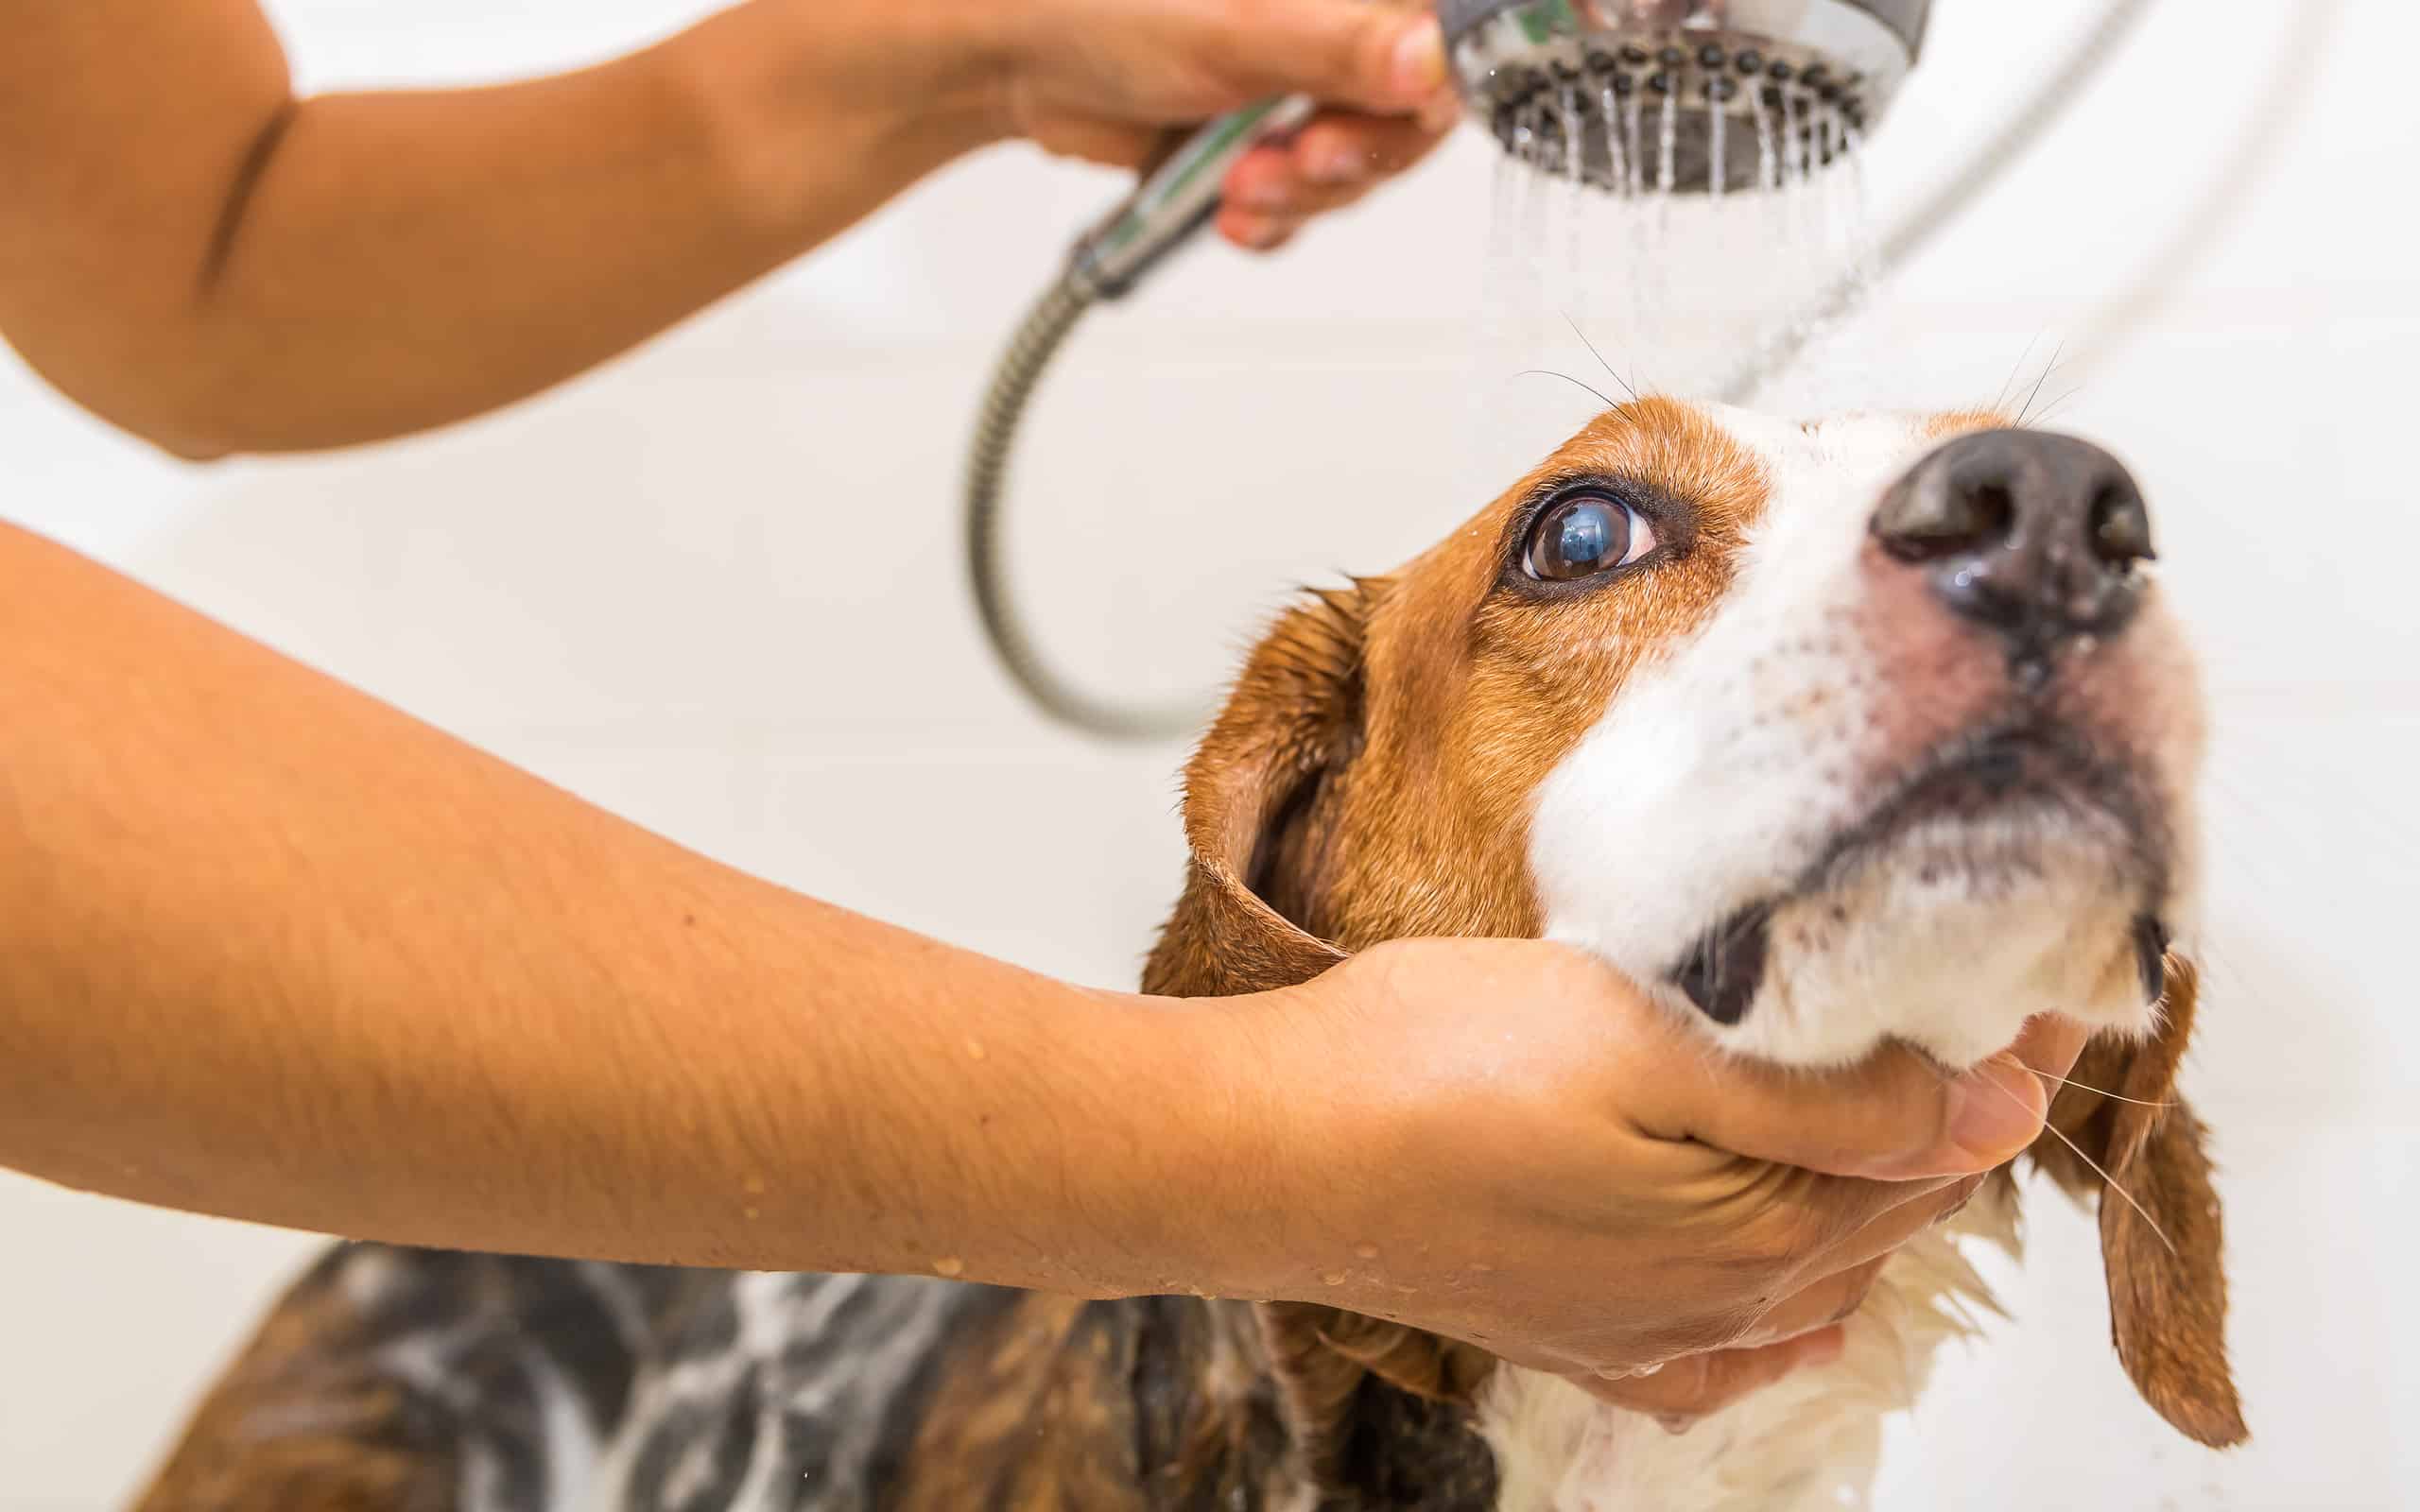 A Beagle mix is being gently rinsed of soap in the shower - View looking up.